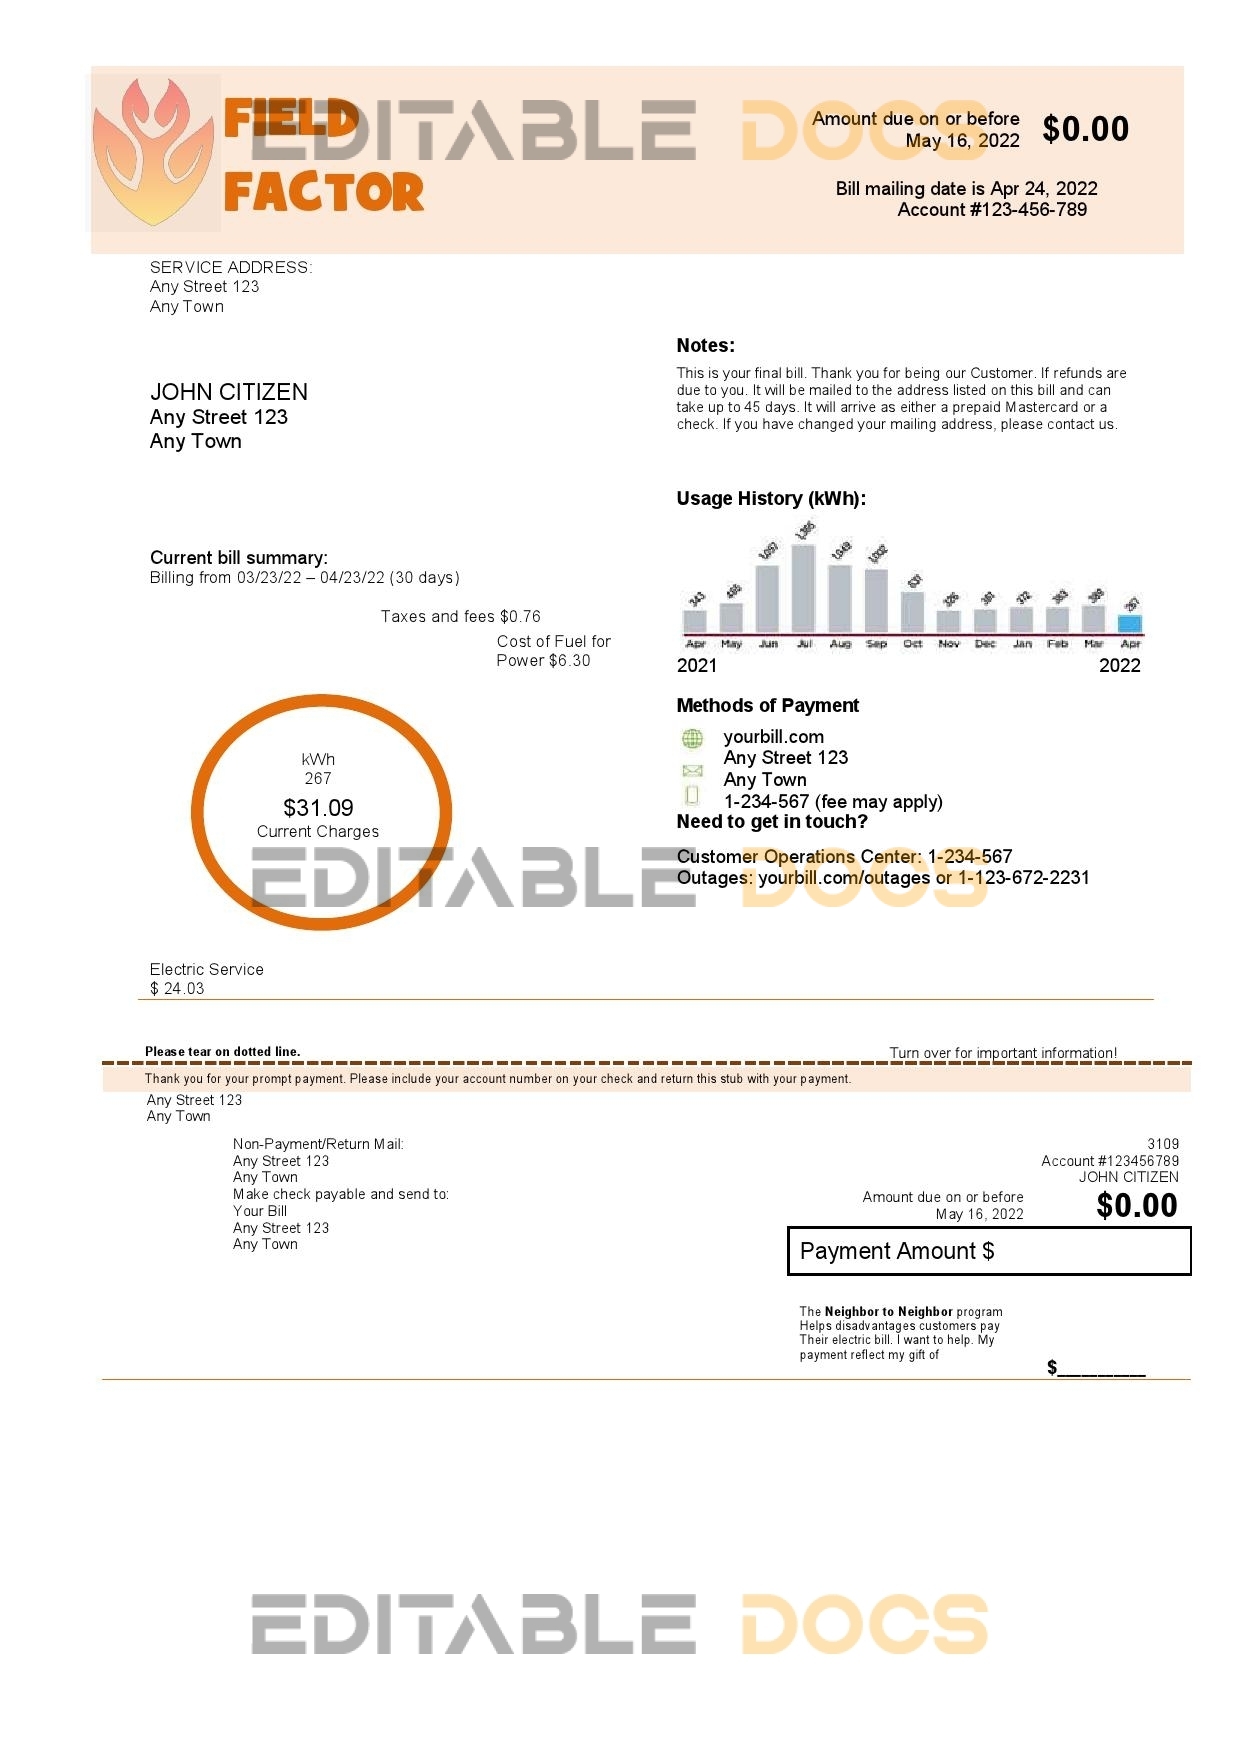 field factor universal multipurpose utility bill template in Word and PDF format